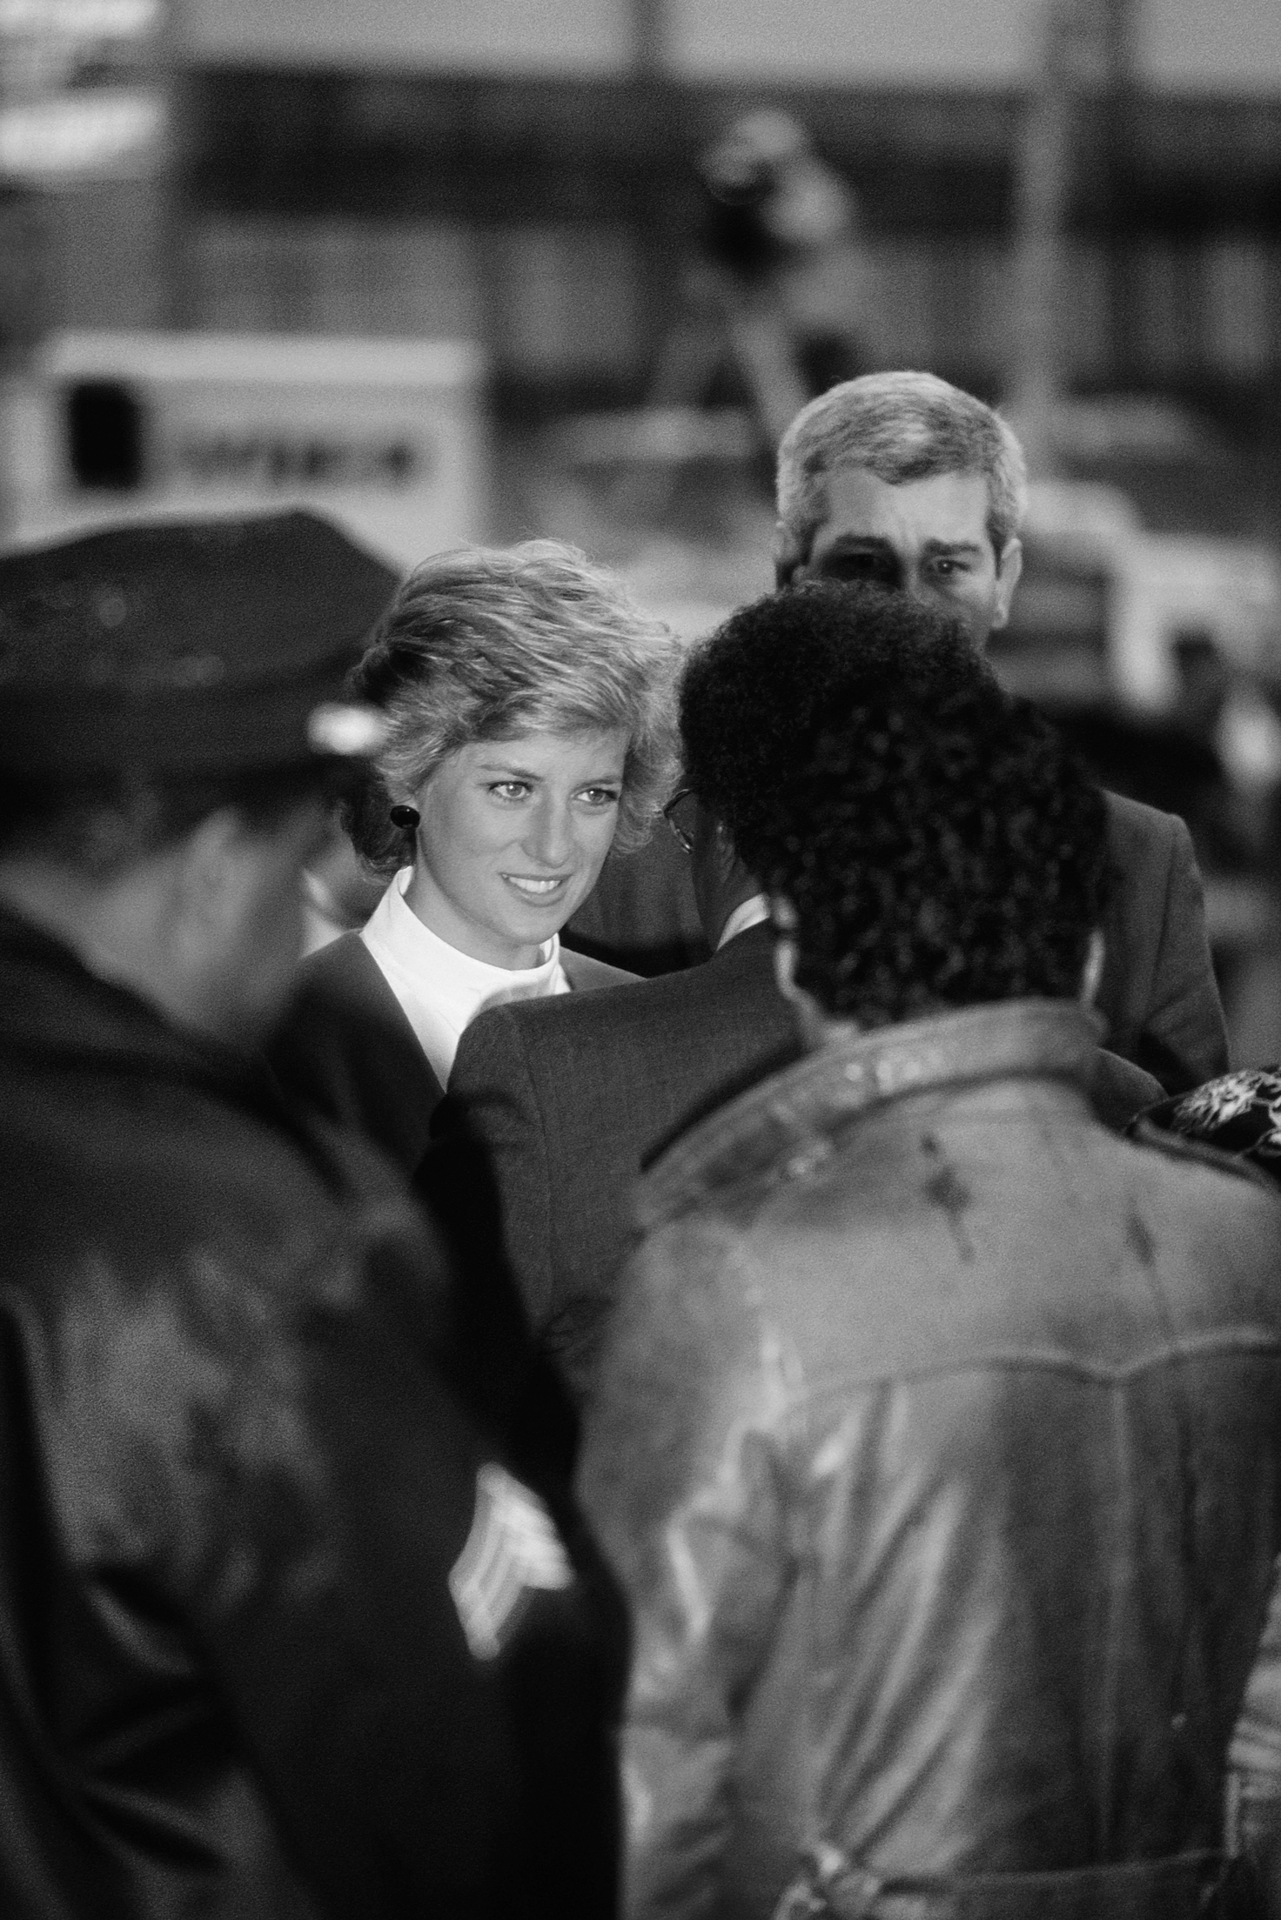 2E03NP3 Diana, Princess of Wales surrounded by police and security as she arrives for a visit to Harlem Hospital?s pediatric AIDS unit in Harlem. New York City, USA. Feb 1989 (Alamy Stock Photo—Credit: parkerphotography / Alamy Stock Photo)